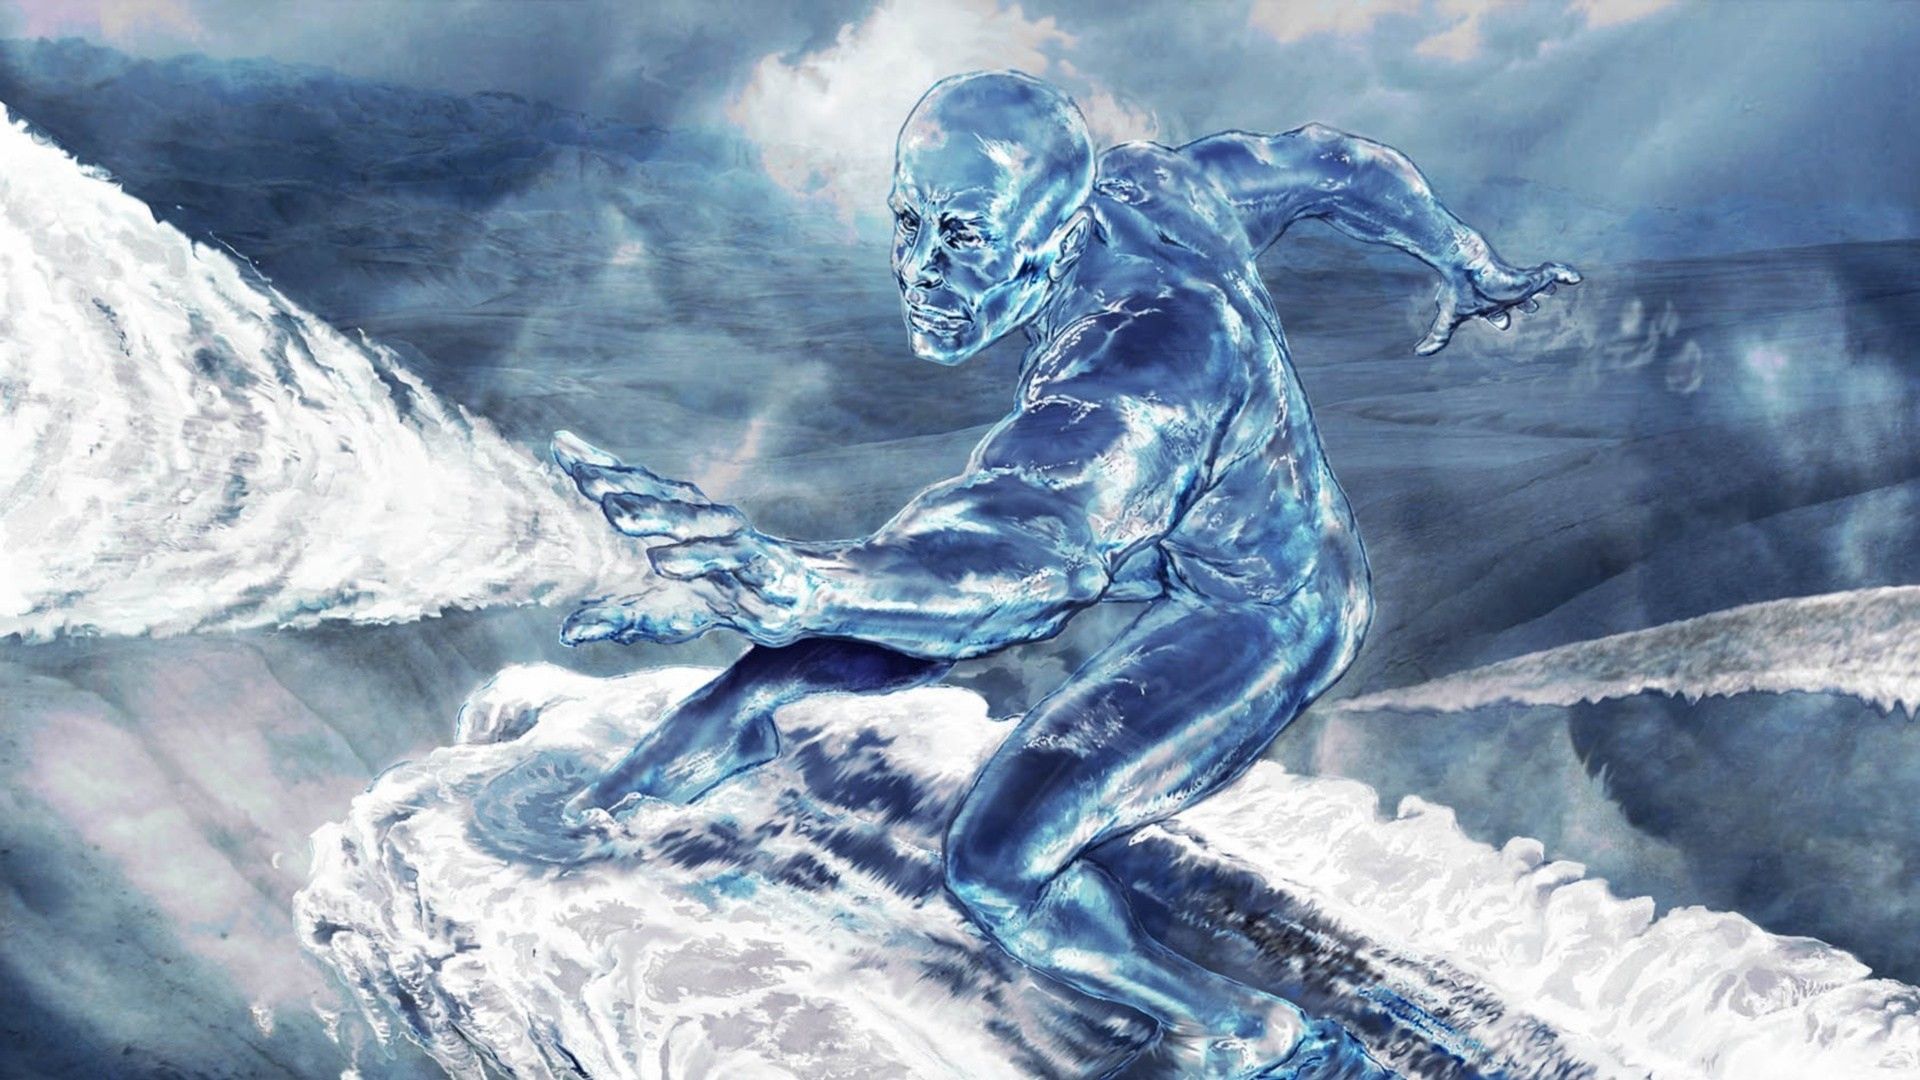 Iceman HD Wallpaper background picture